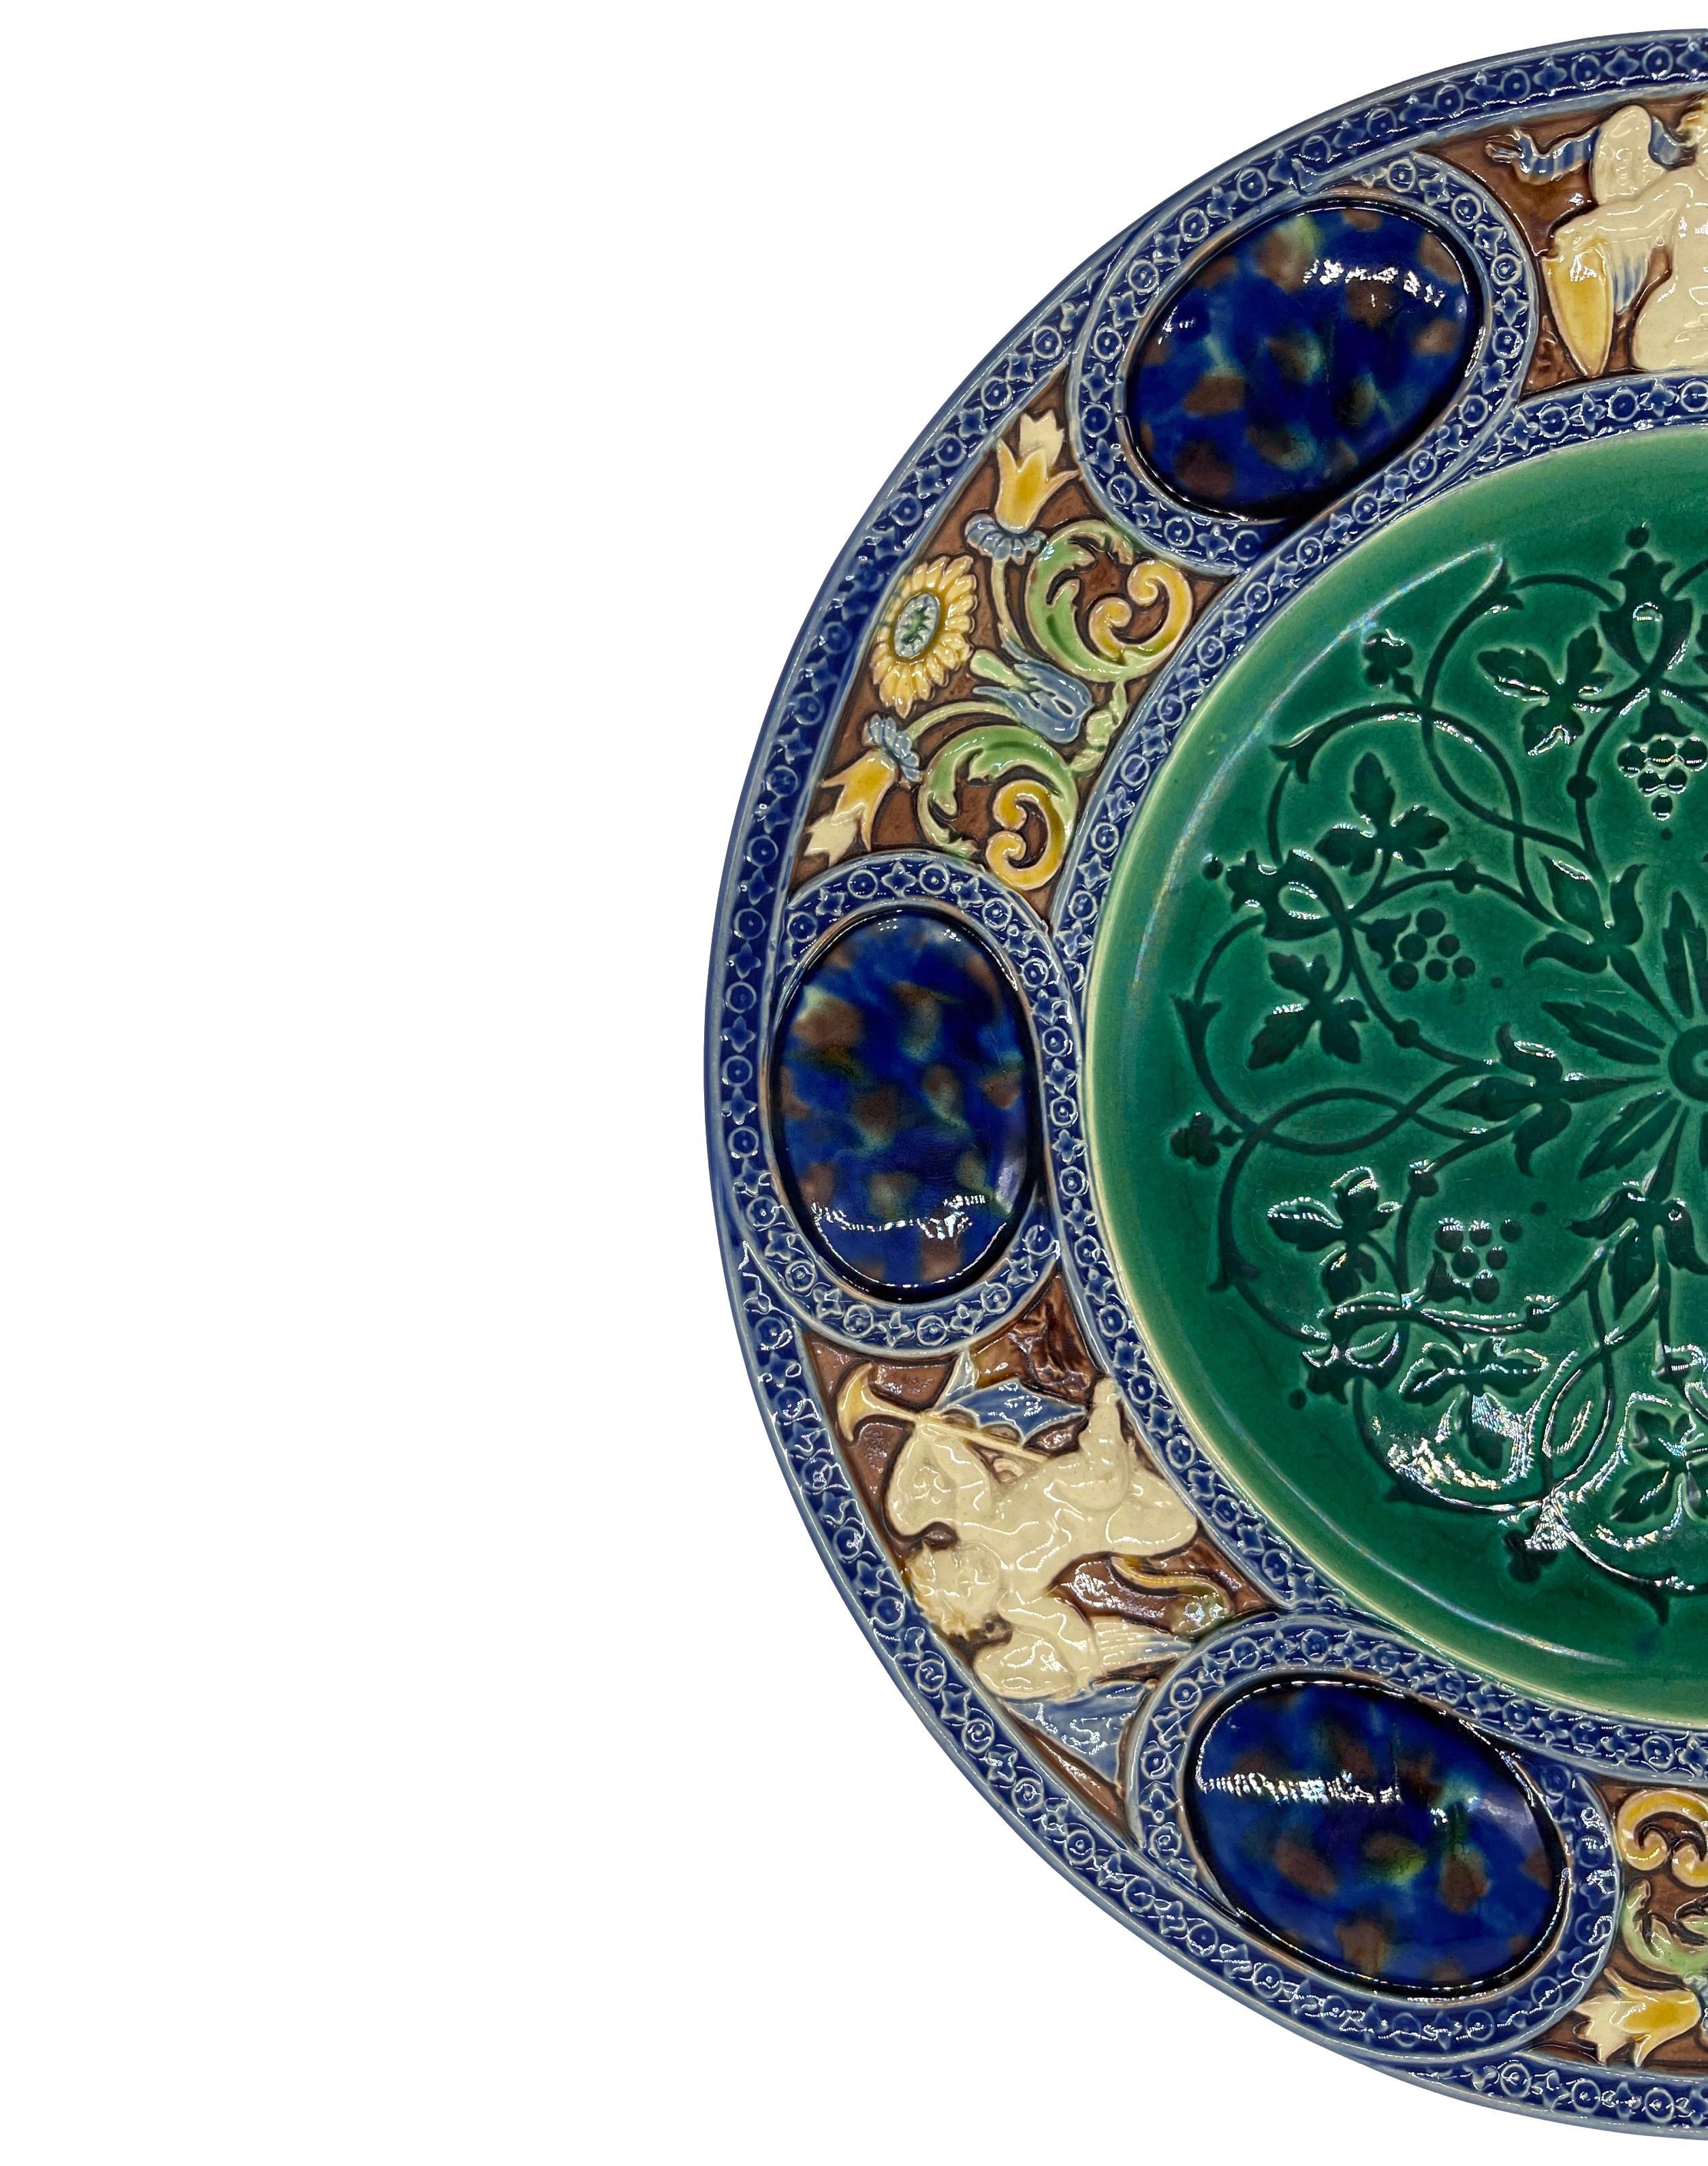 Minton Majolica cabinet plate, with a central medieval design in émail-ombrant, a difficult technique achieved by flooding majolica glazes over an intaglio design, causing the impressed cavities to appear as shadows of various depths; bordered with